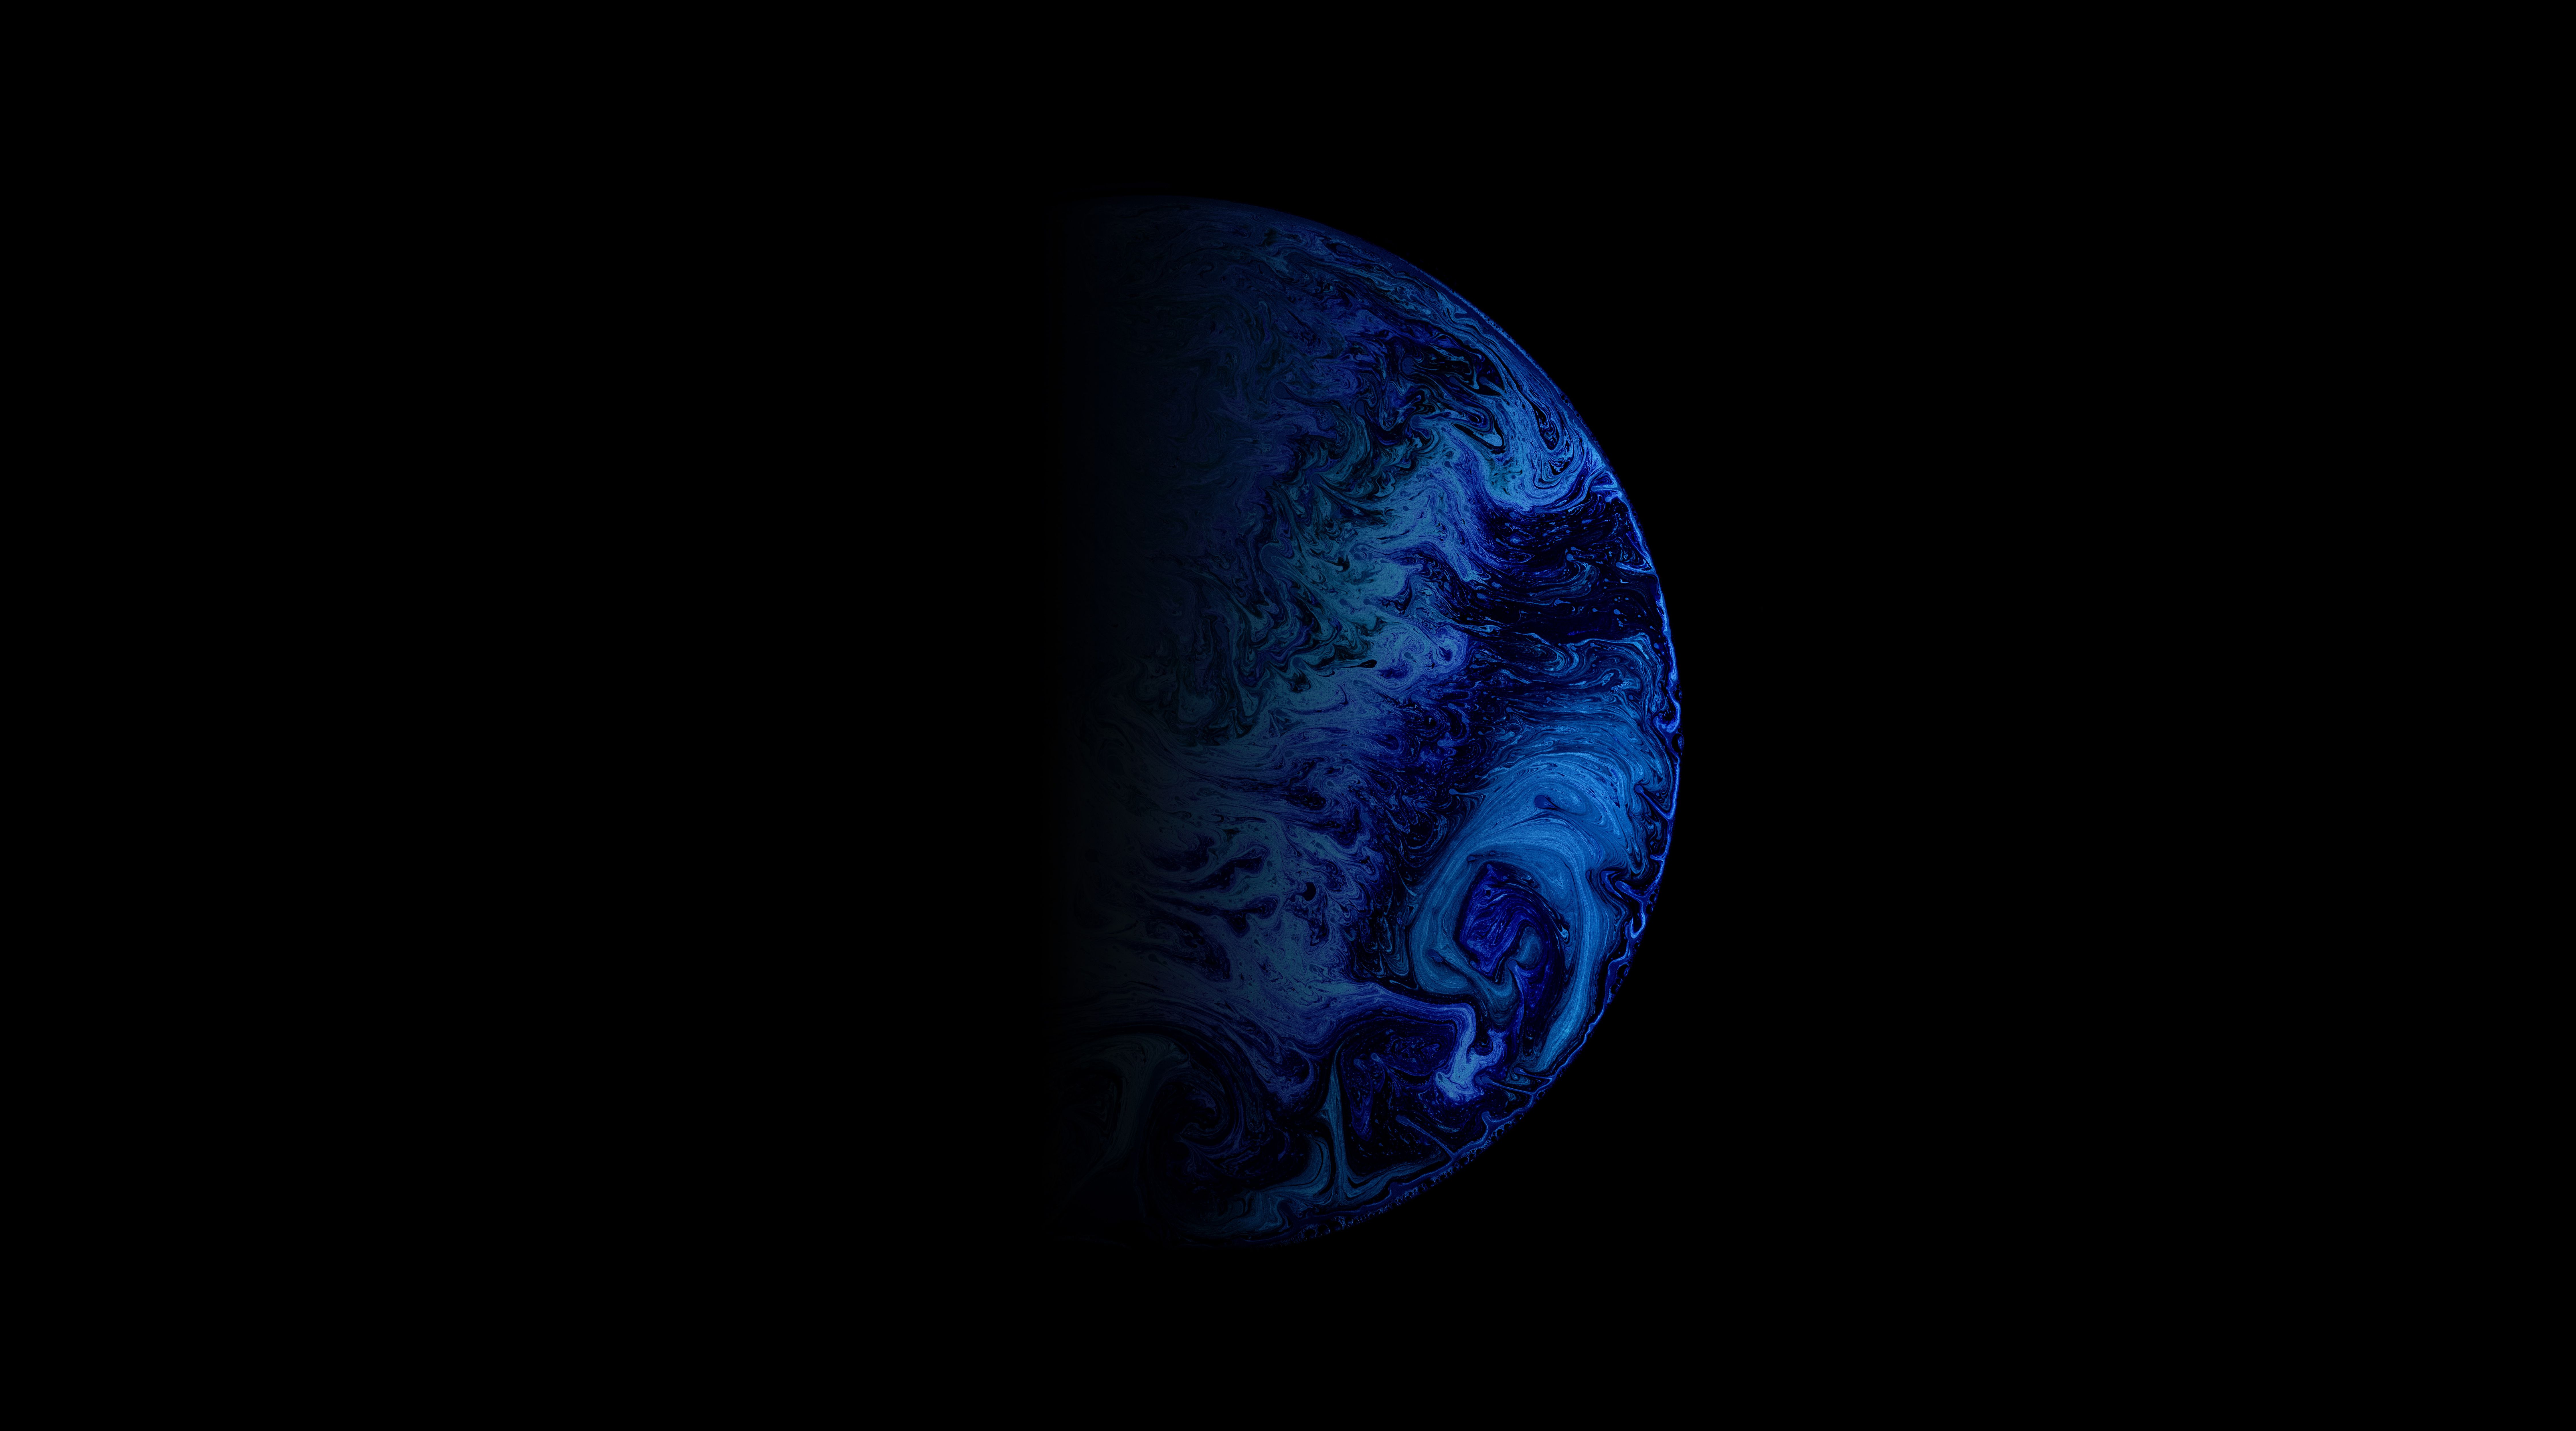 Planet Wallpaper 4K, Astronomy, Outer space, Blue, Black background, Space